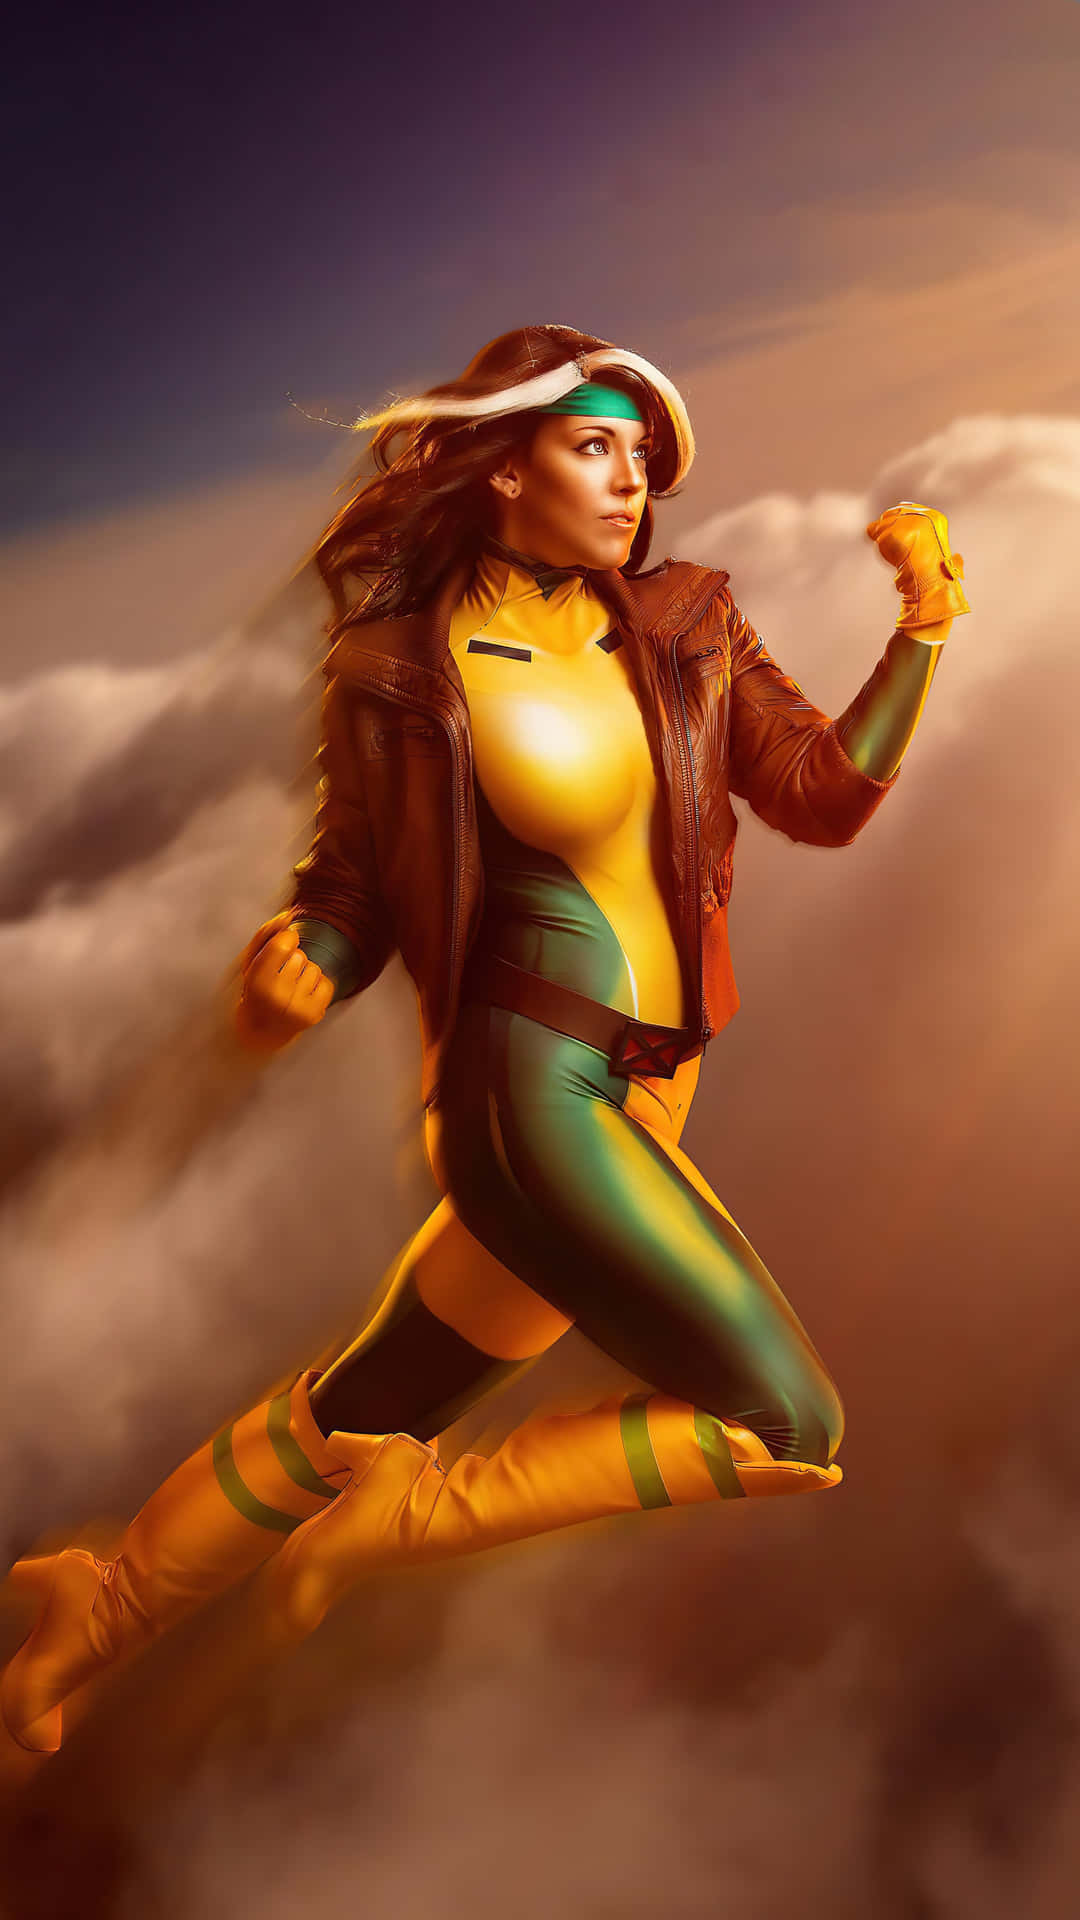 A Woman In A Yellow And Green Costume Flying Through The Clouds Background